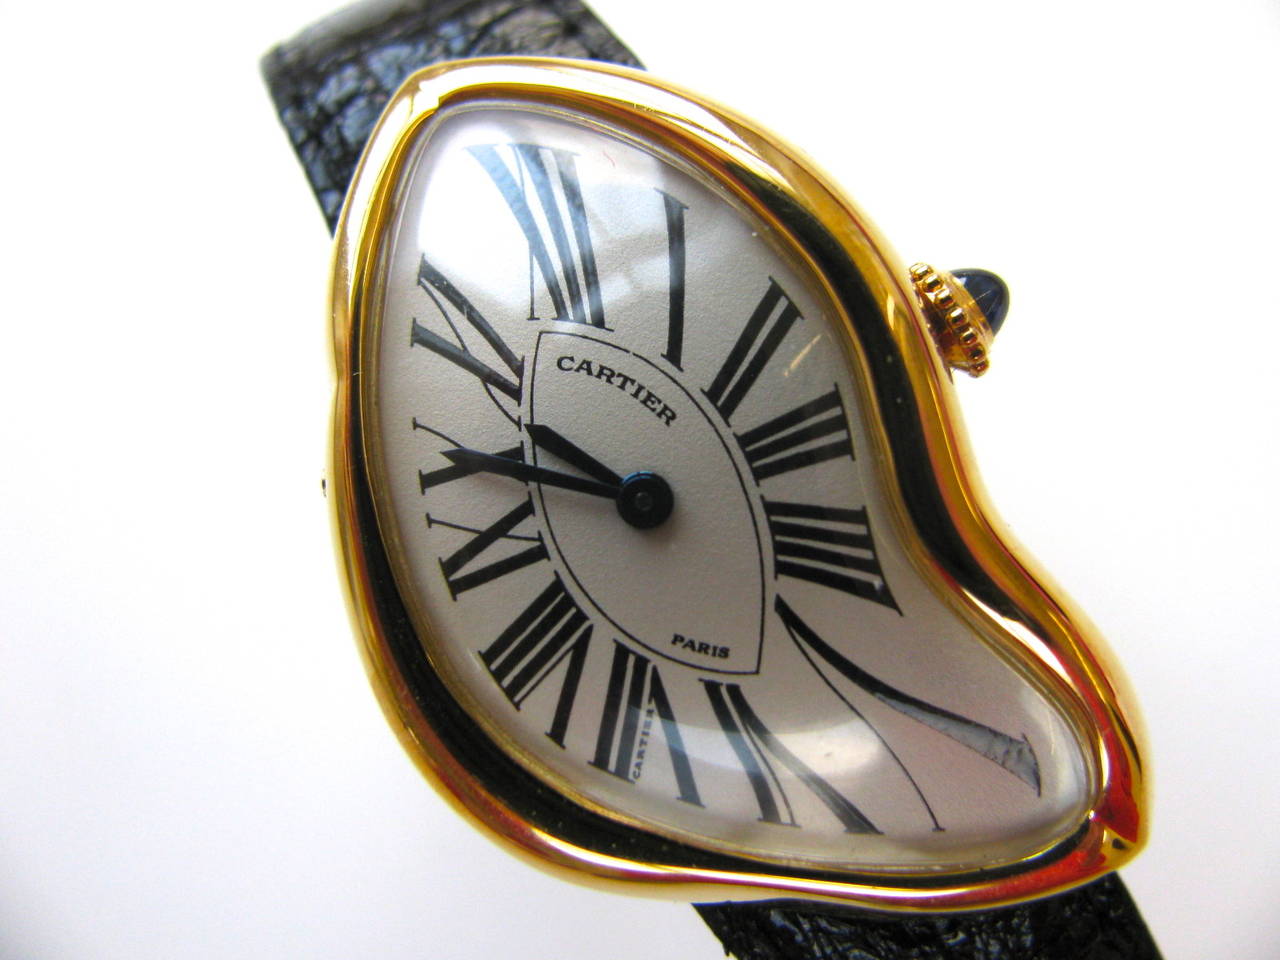 Cartier 1991 Crash Watch. A men's 18k Yellow gold asymmetric wristwatch No.  332/400. Produced originally by Cartier in 1967, this surrealist style watch was revived again , in a limited edition form, in 1991. This stunning example from 1991 is in